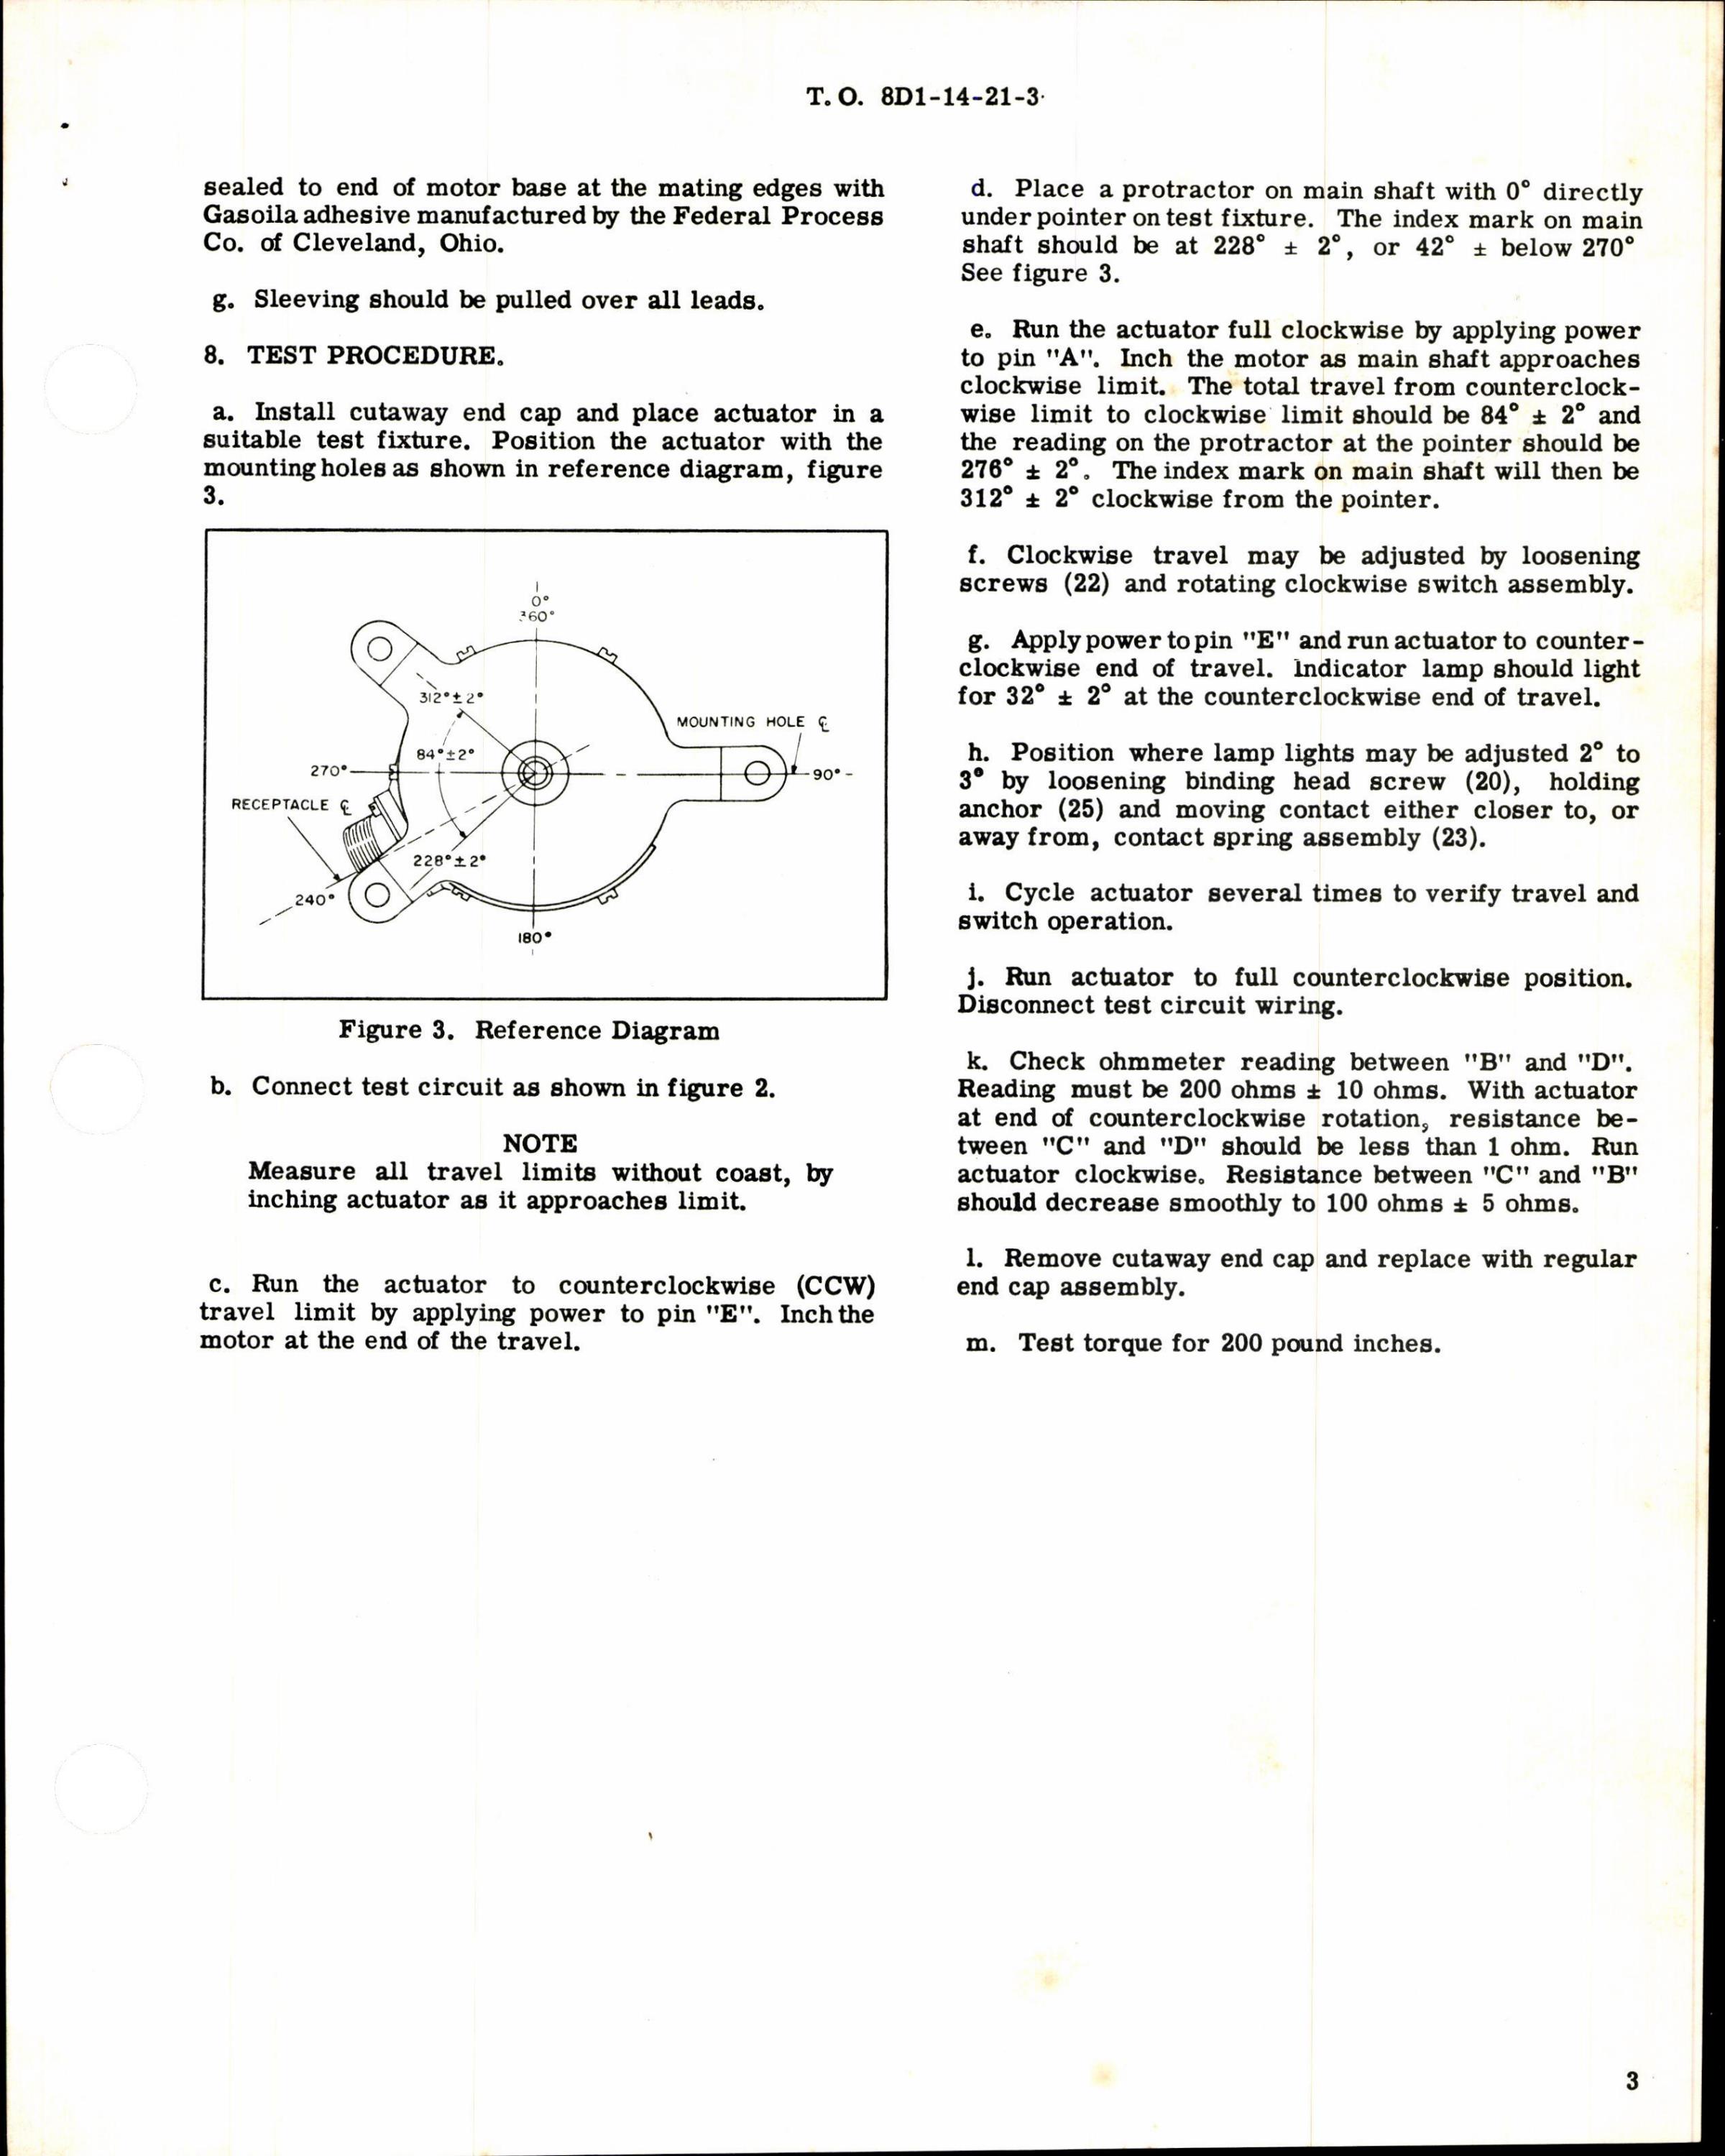 Sample page 3 from AirCorps Library document: Instructions w Parts Breakdown for Actuator, Cockpit Mixing Valve